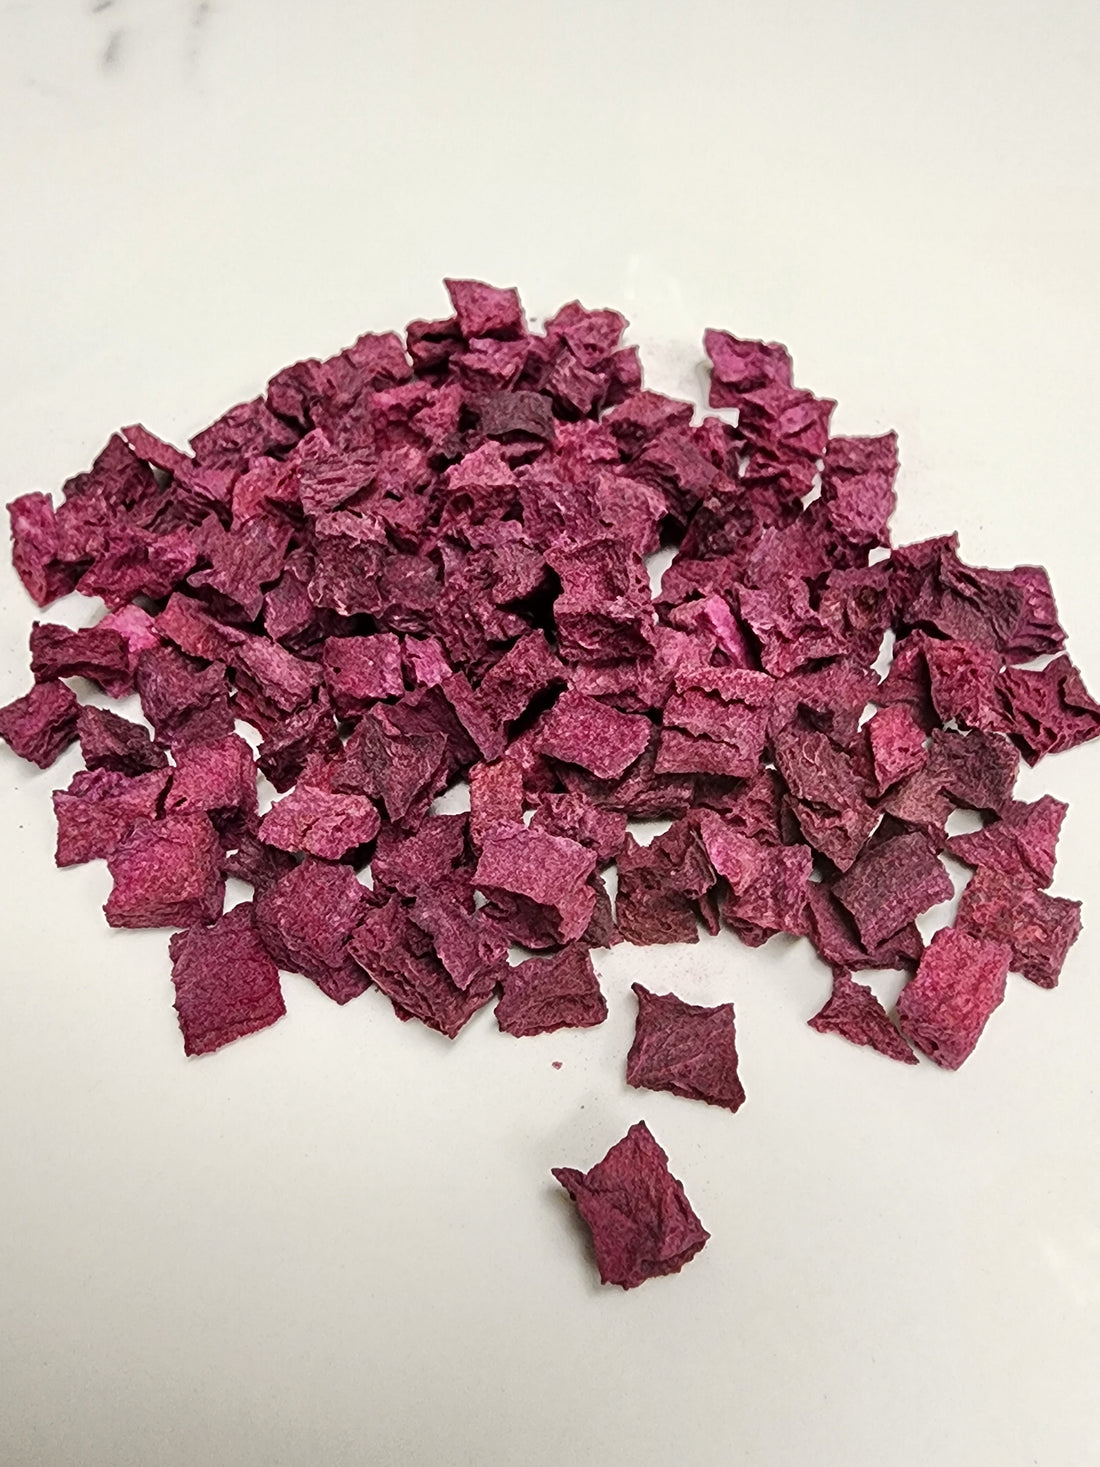 Freeze-dried Beets (tiny pieces)